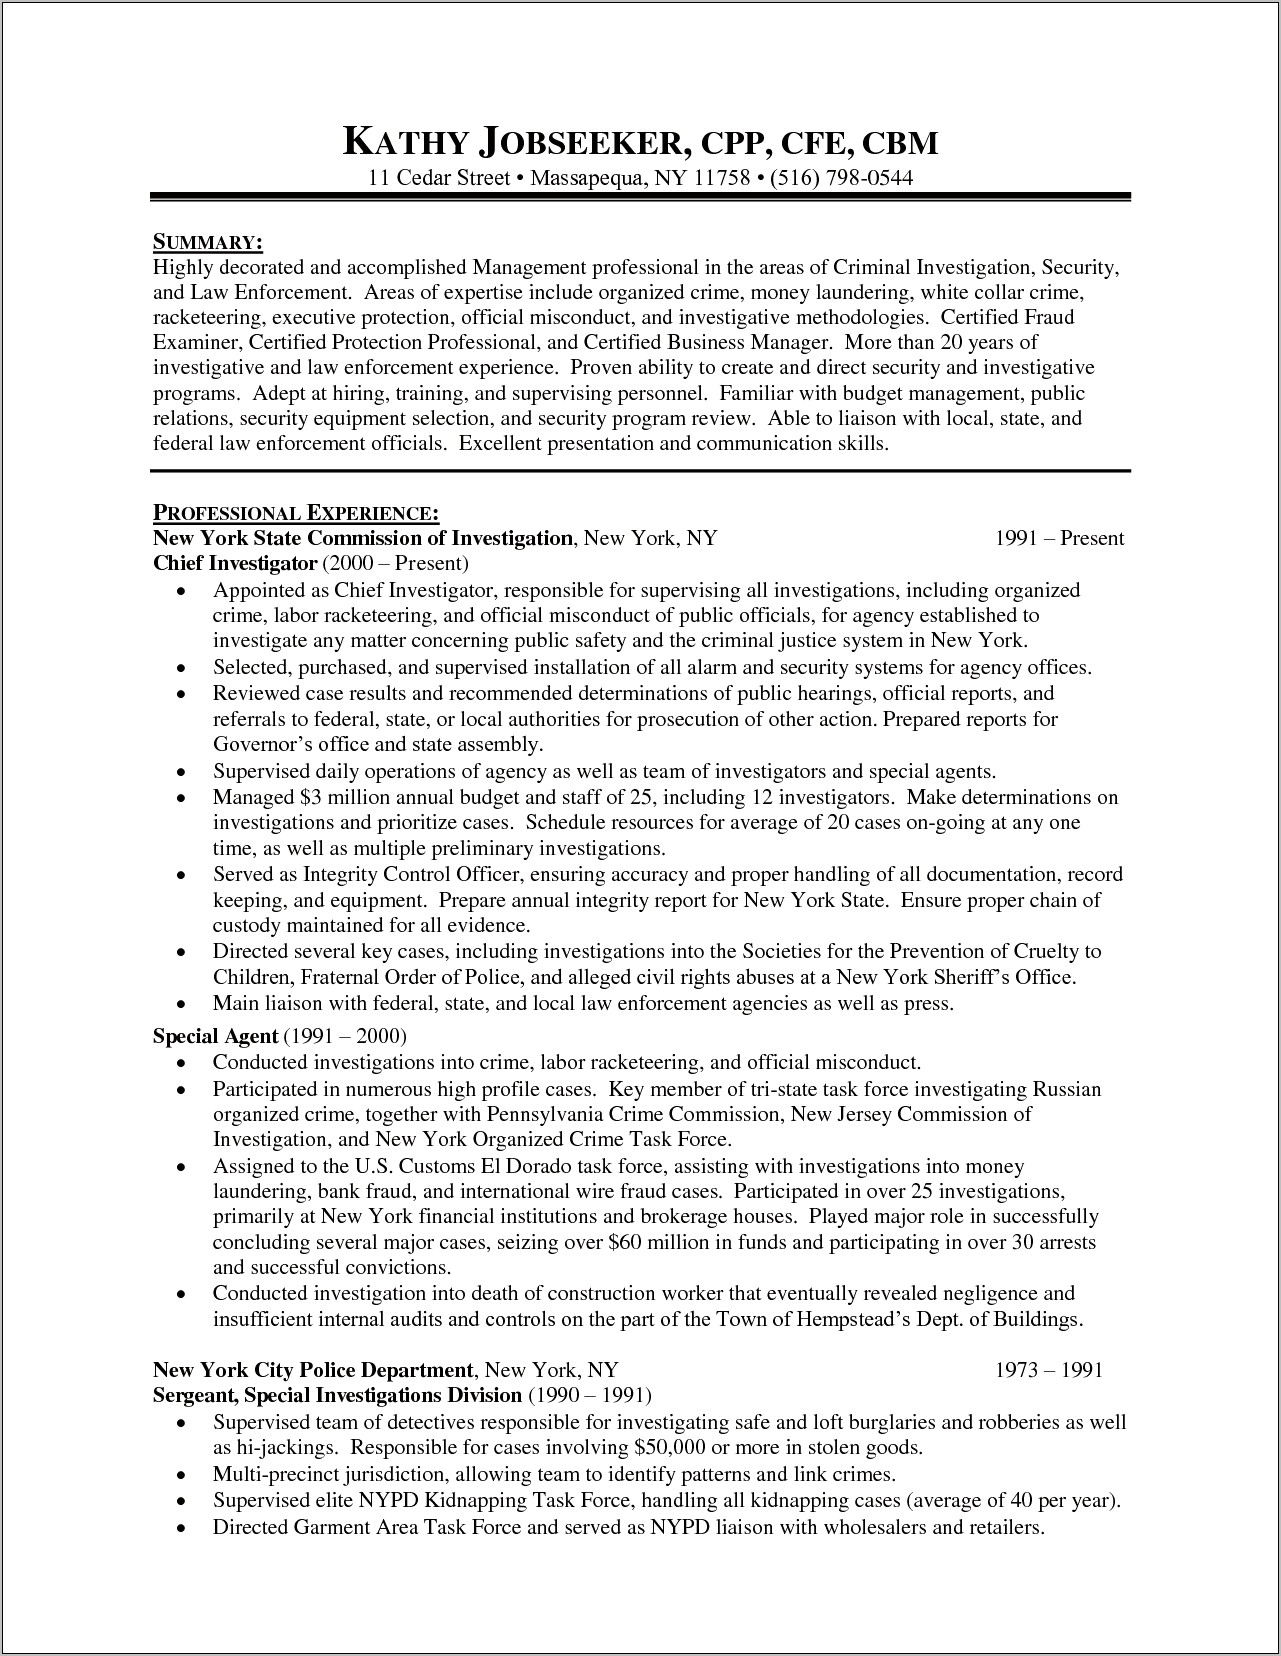 Resume Objective For Entry Level Law Enforcement